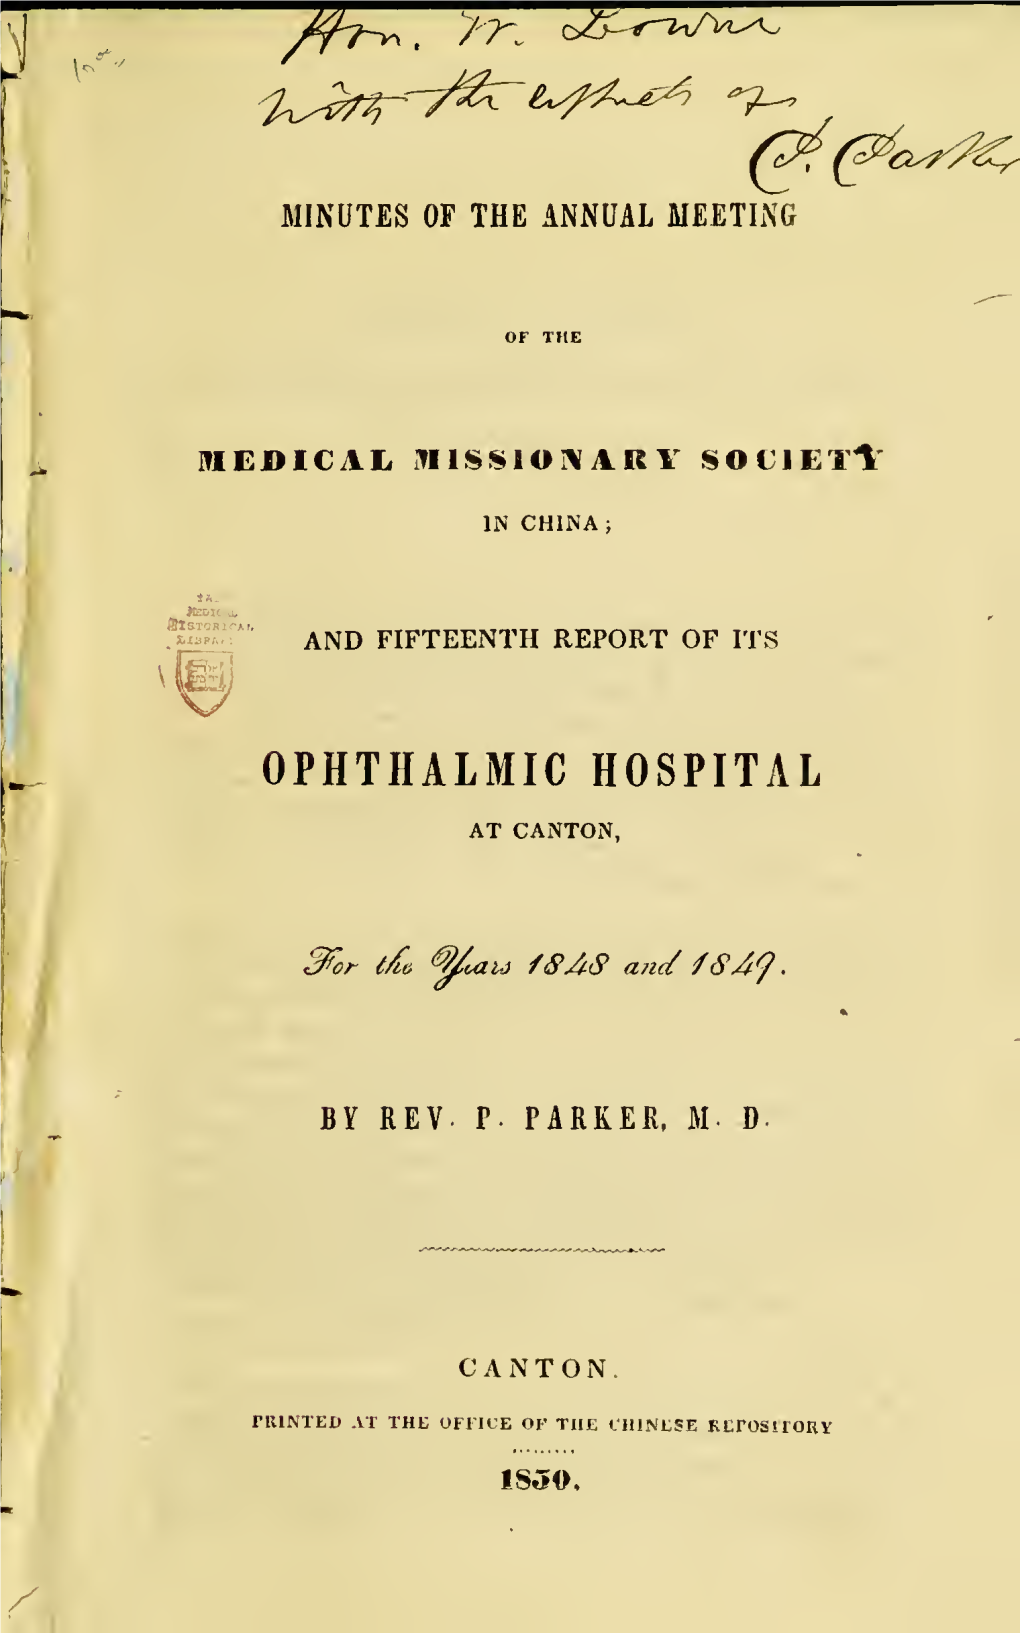 And Fifteenth Report of Its Ophthalmic Hospital At